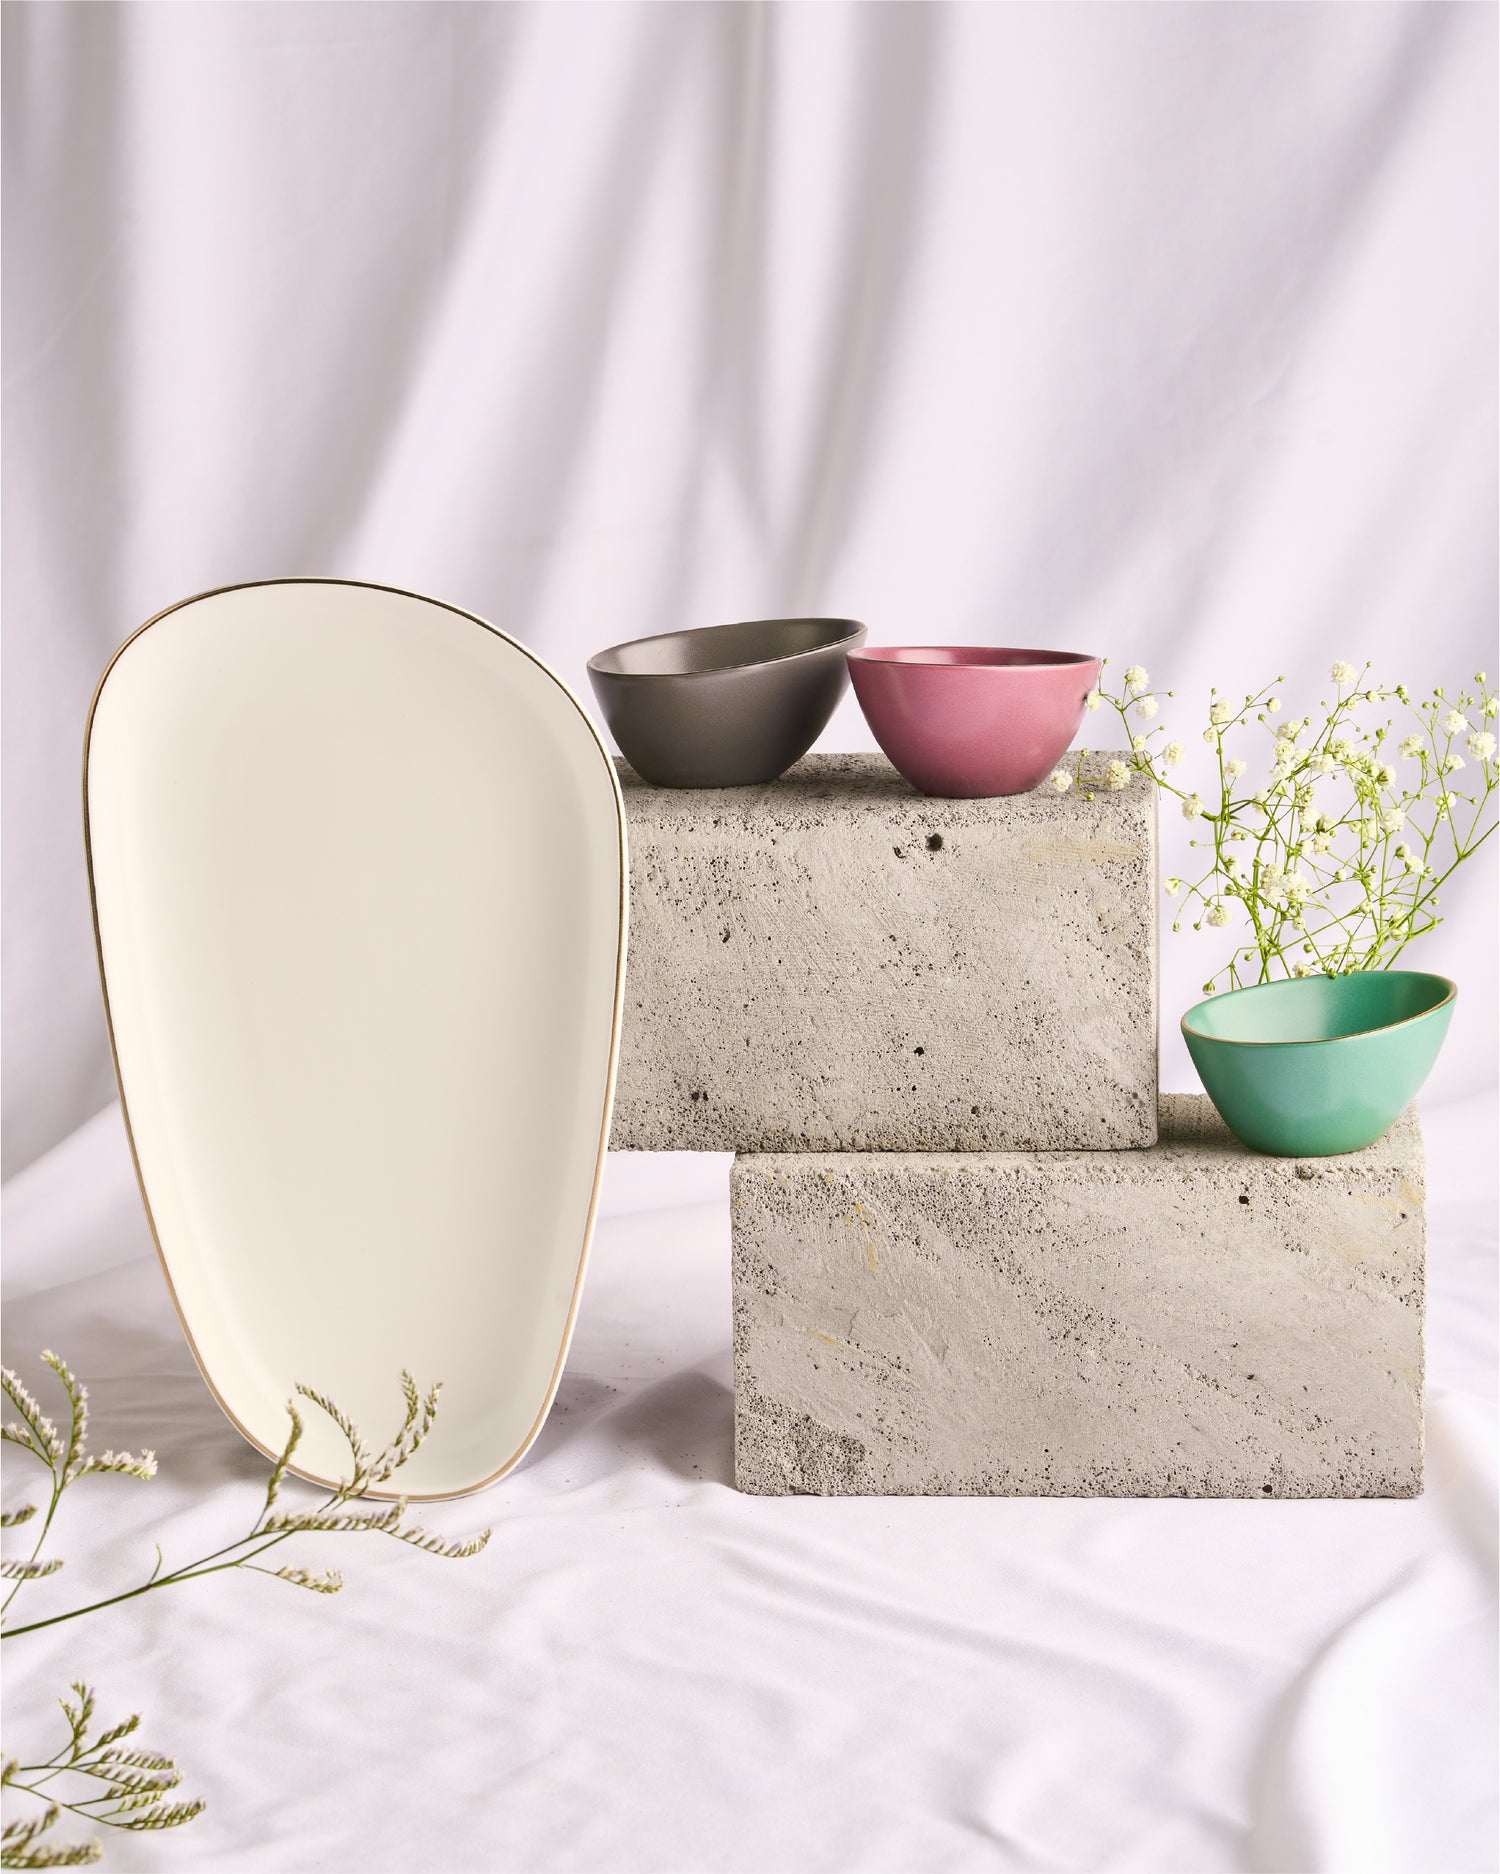 Isle Oval Combo / Pebble Grey; Viridian Green; Lavender Herb || Eleganza Combo - Elevate Your Table Setting with Stylish Simplicity - Vola Global